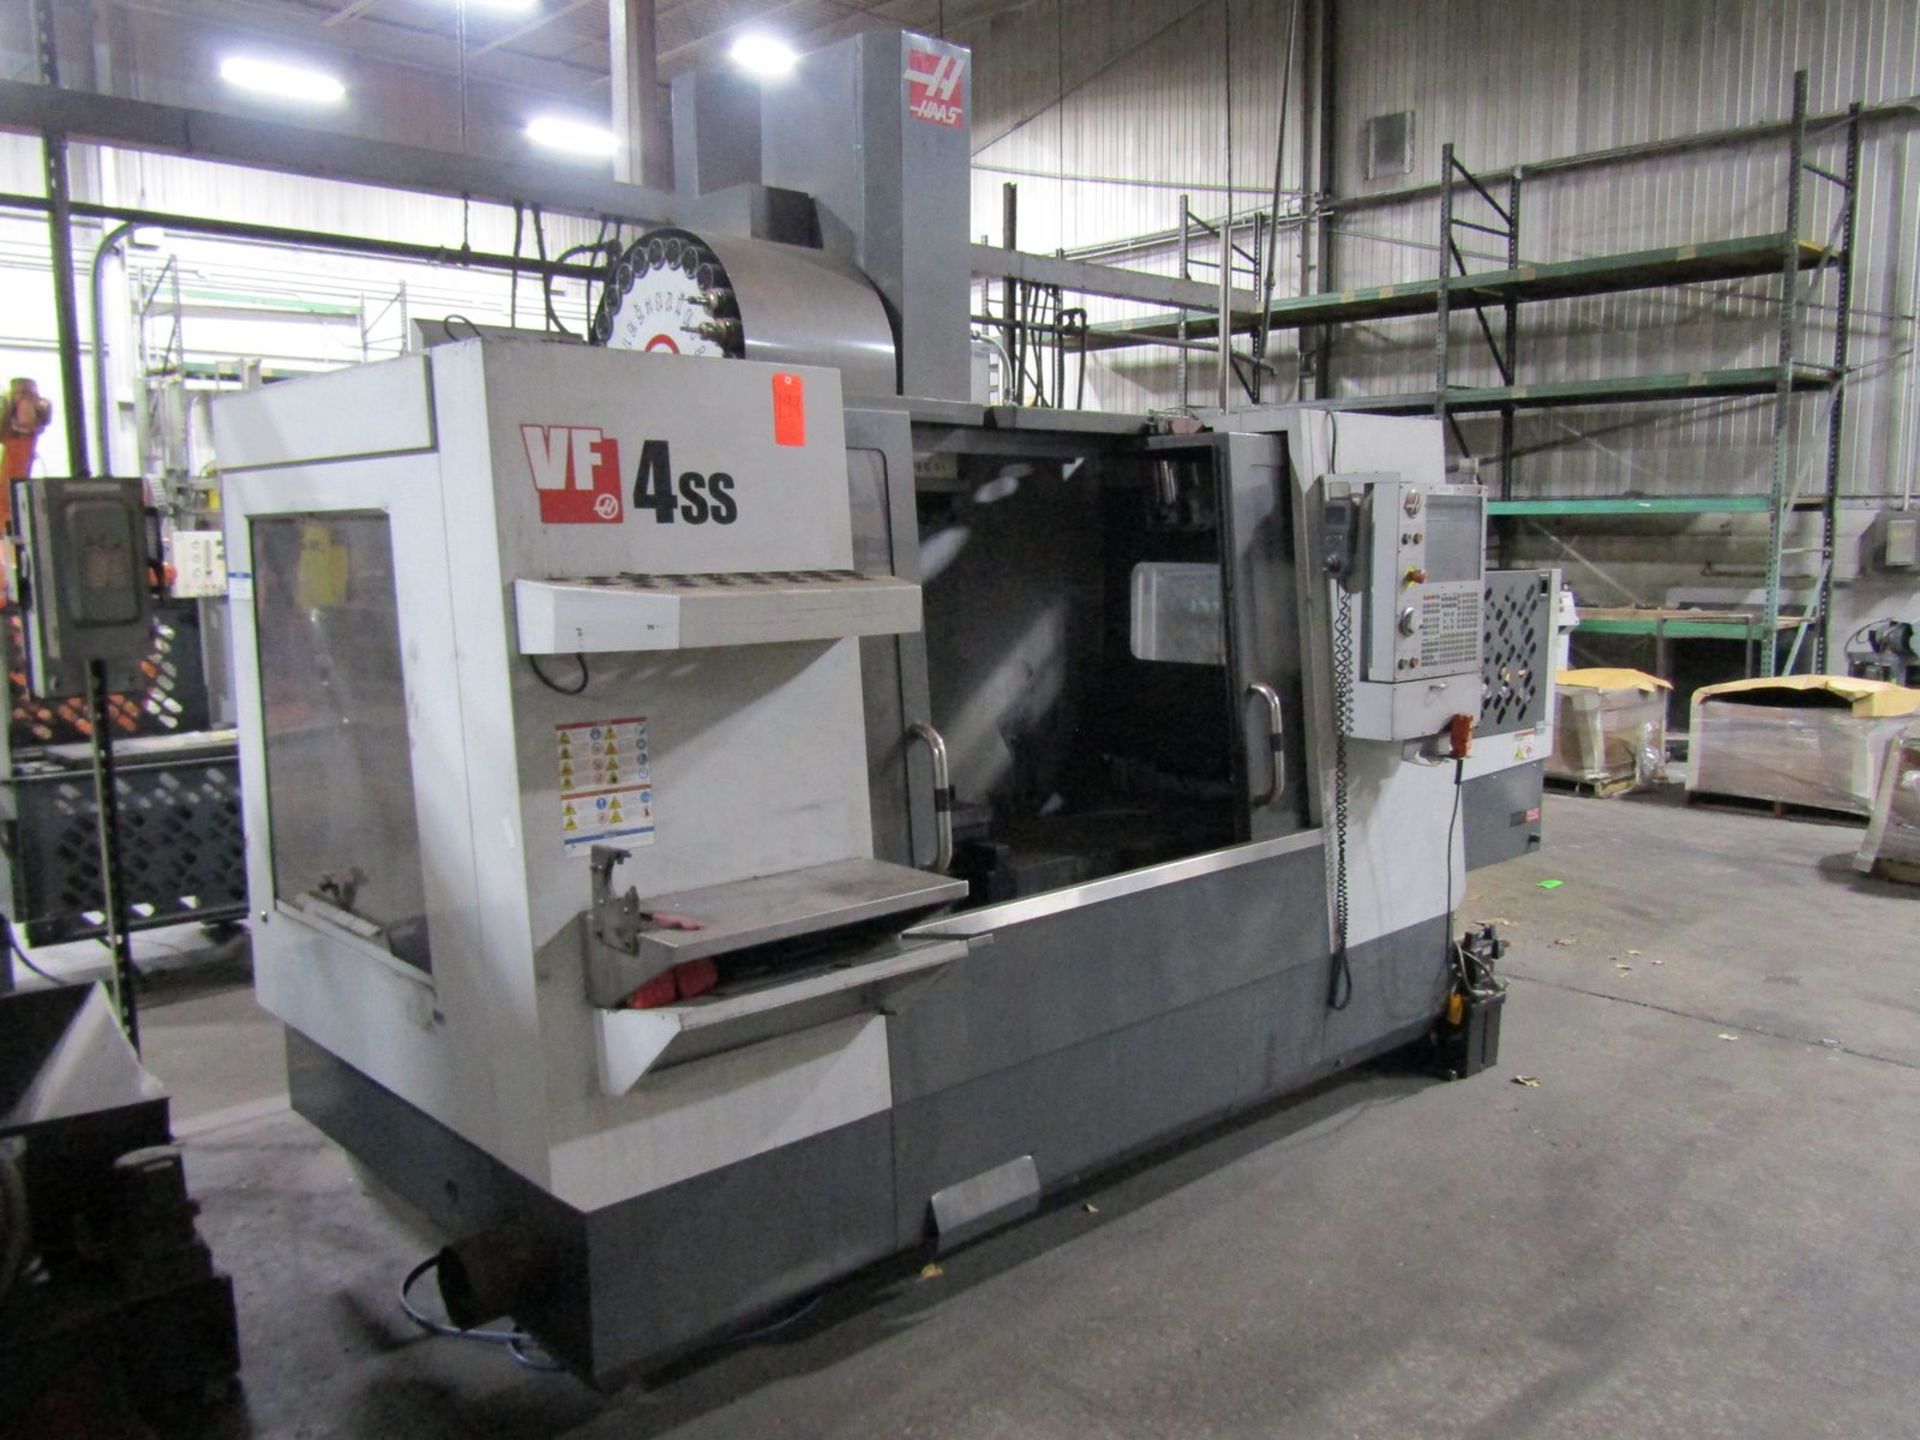 Haas VF-4SSAPC CNC Vertical Machining Center, S/N: 1091790 (2012); with Haas CNC Controls with Hand- - Image 3 of 8